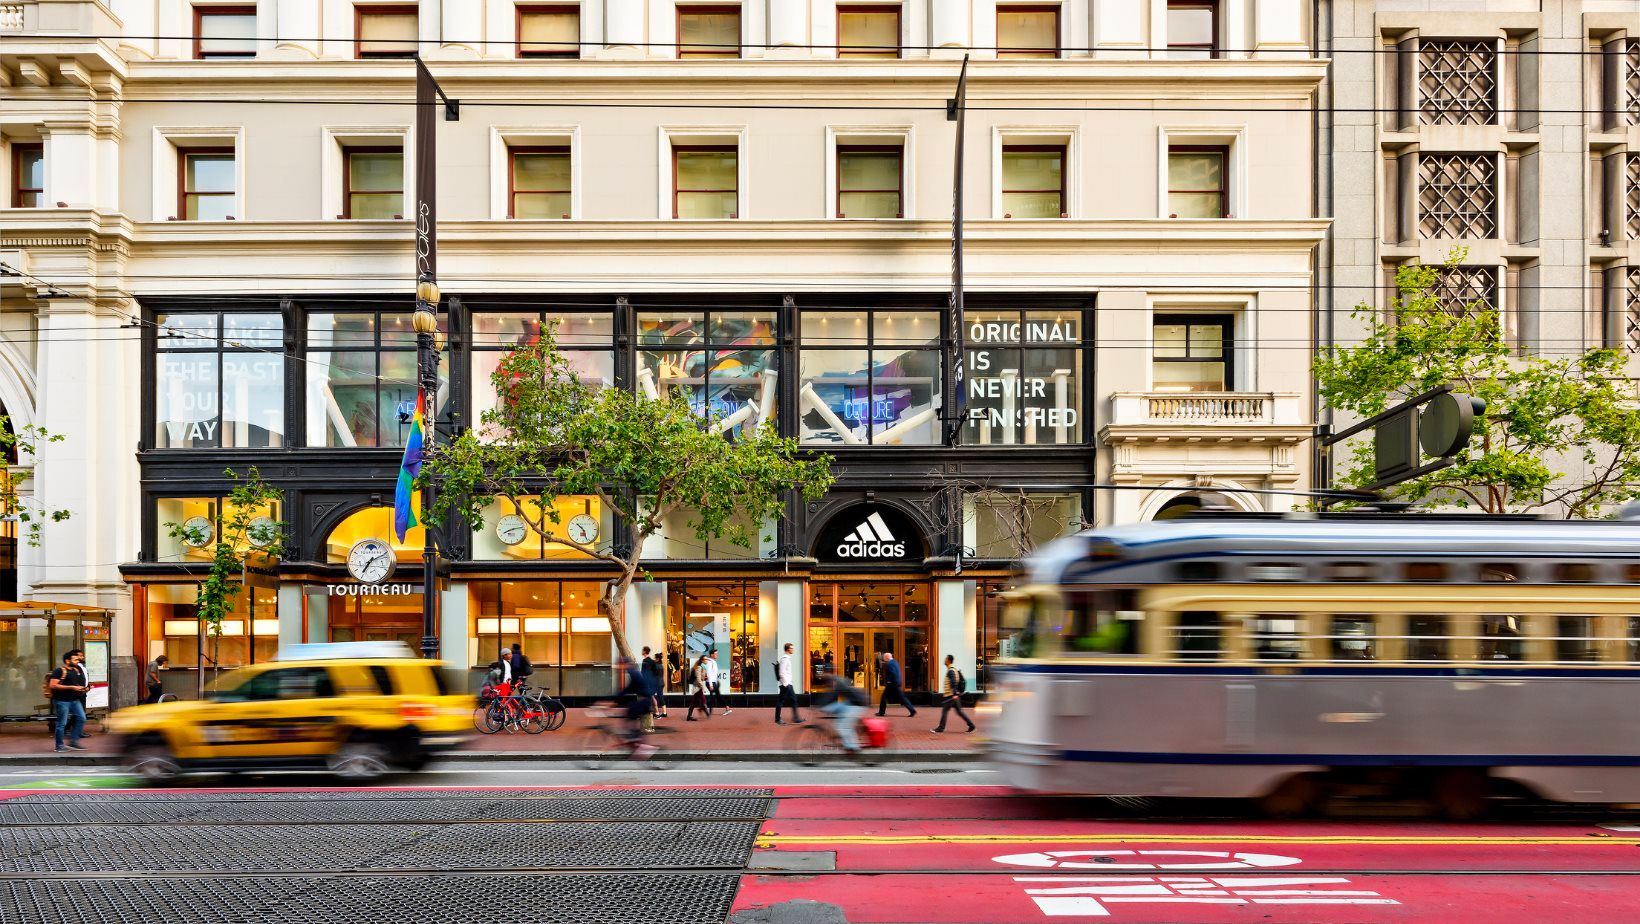 San Francisco's Downtown Apocalypse Be Damned, As Retail Experts